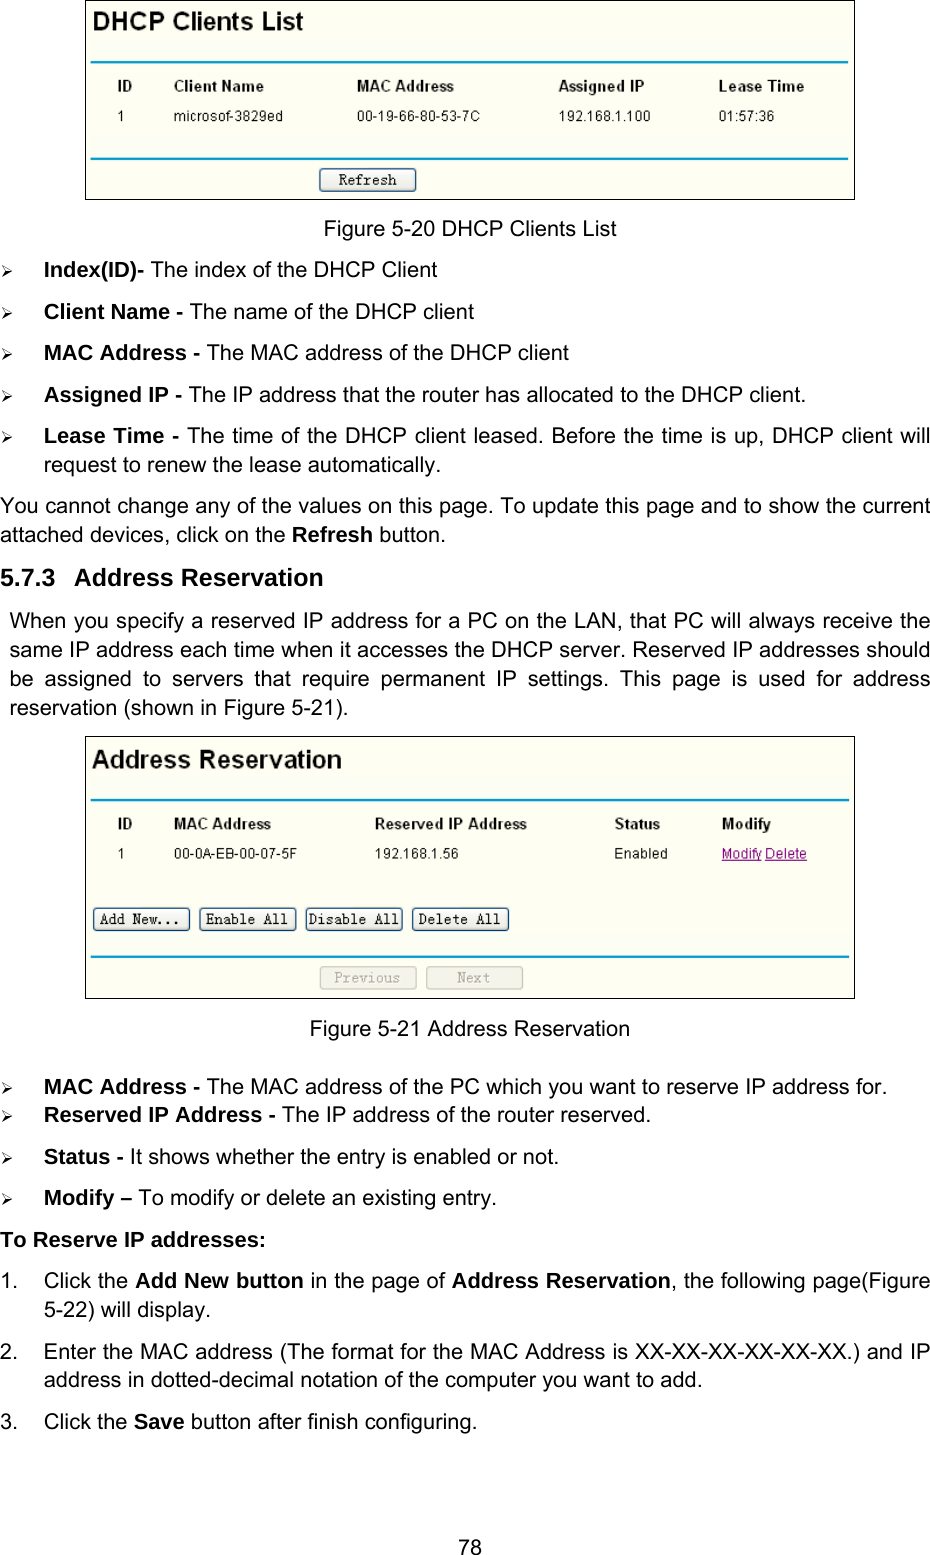  78  Figure 5-20 DHCP Clients List ¾ Index(ID)- The index of the DHCP Client   ¾ Client Name - The name of the DHCP client   ¾ MAC Address - The MAC address of the DHCP client   ¾ Assigned IP - The IP address that the router has allocated to the DHCP client. ¾ Lease Time - The time of the DHCP client leased. Before the time is up, DHCP client will request to renew the lease automatically. You cannot change any of the values on this page. To update this page and to show the current attached devices, click on the Refresh button. 5.7.3  Address Reservation When you specify a reserved IP address for a PC on the LAN, that PC will always receive the same IP address each time when it accesses the DHCP server. Reserved IP addresses should be assigned to servers that require permanent IP settings. This page is used for address reservation (shown in Figure 5-21).  Figure 5-21 Address Reservation ¾ MAC Address - The MAC address of the PC which you want to reserve IP address for. ¾ Reserved IP Address - The IP address of the router reserved. ¾ Status - It shows whether the entry is enabled or not. ¾ Modify – To modify or delete an existing entry. To Reserve IP addresses:   1. Click the Add New button in the page of Address Reservation, the following page(Figure 5-22) will display.   2.  Enter the MAC address (The format for the MAC Address is XX-XX-XX-XX-XX-XX.) and IP address in dotted-decimal notation of the computer you want to add.   3. Click the Save button after finish configuring.   